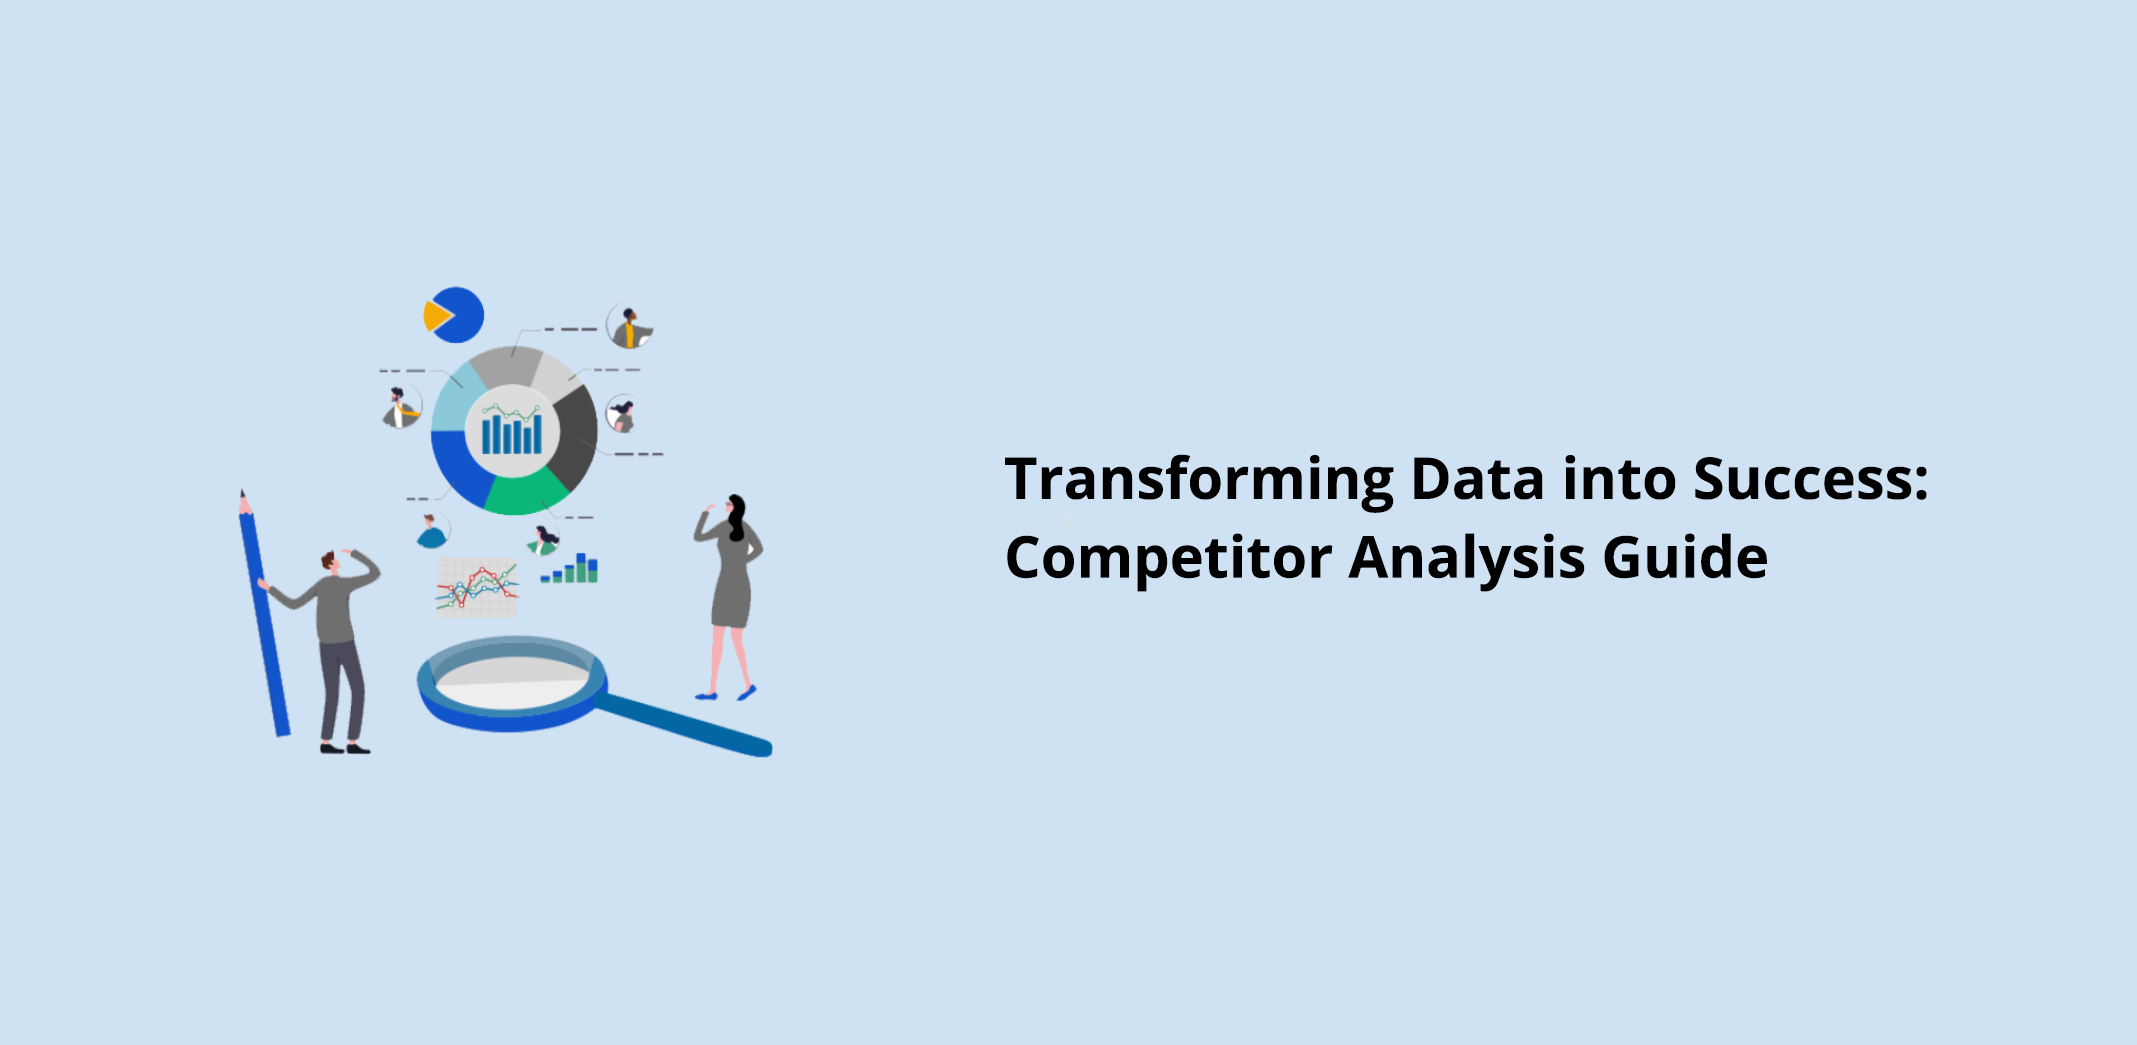 Transforming Data into Success: Competitor Analysis Guide